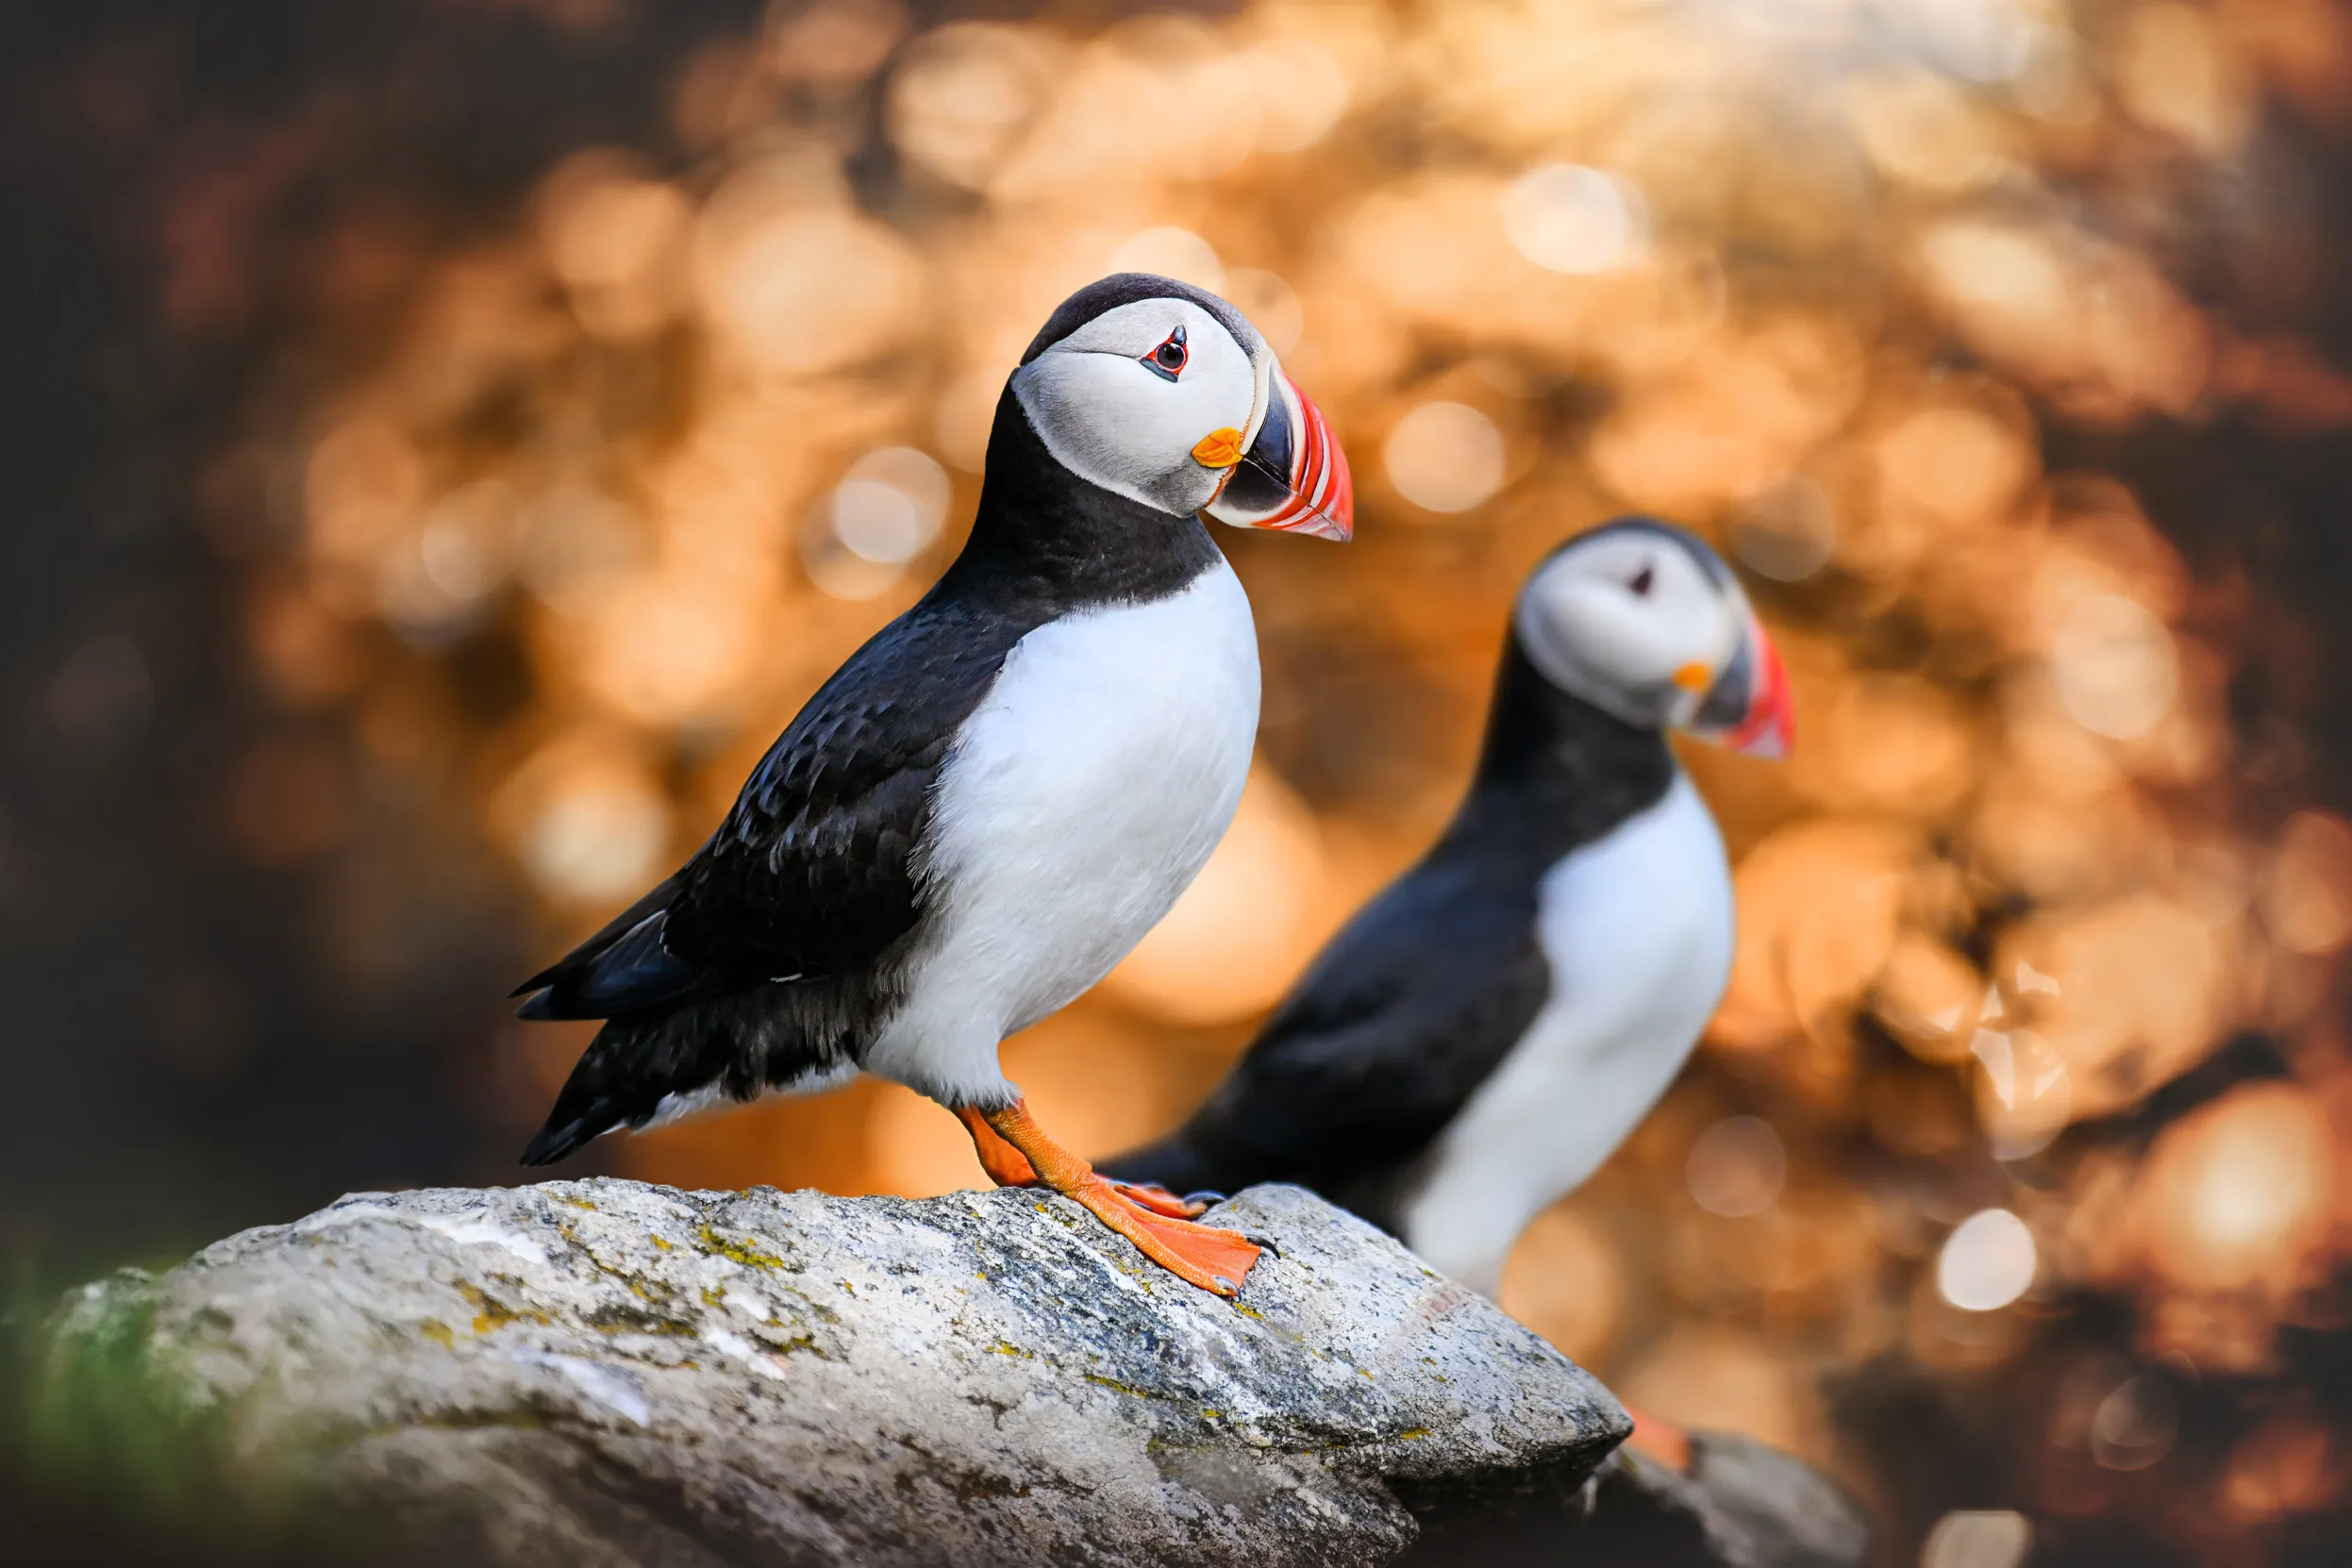 A pair of Puffins stood of a rock.